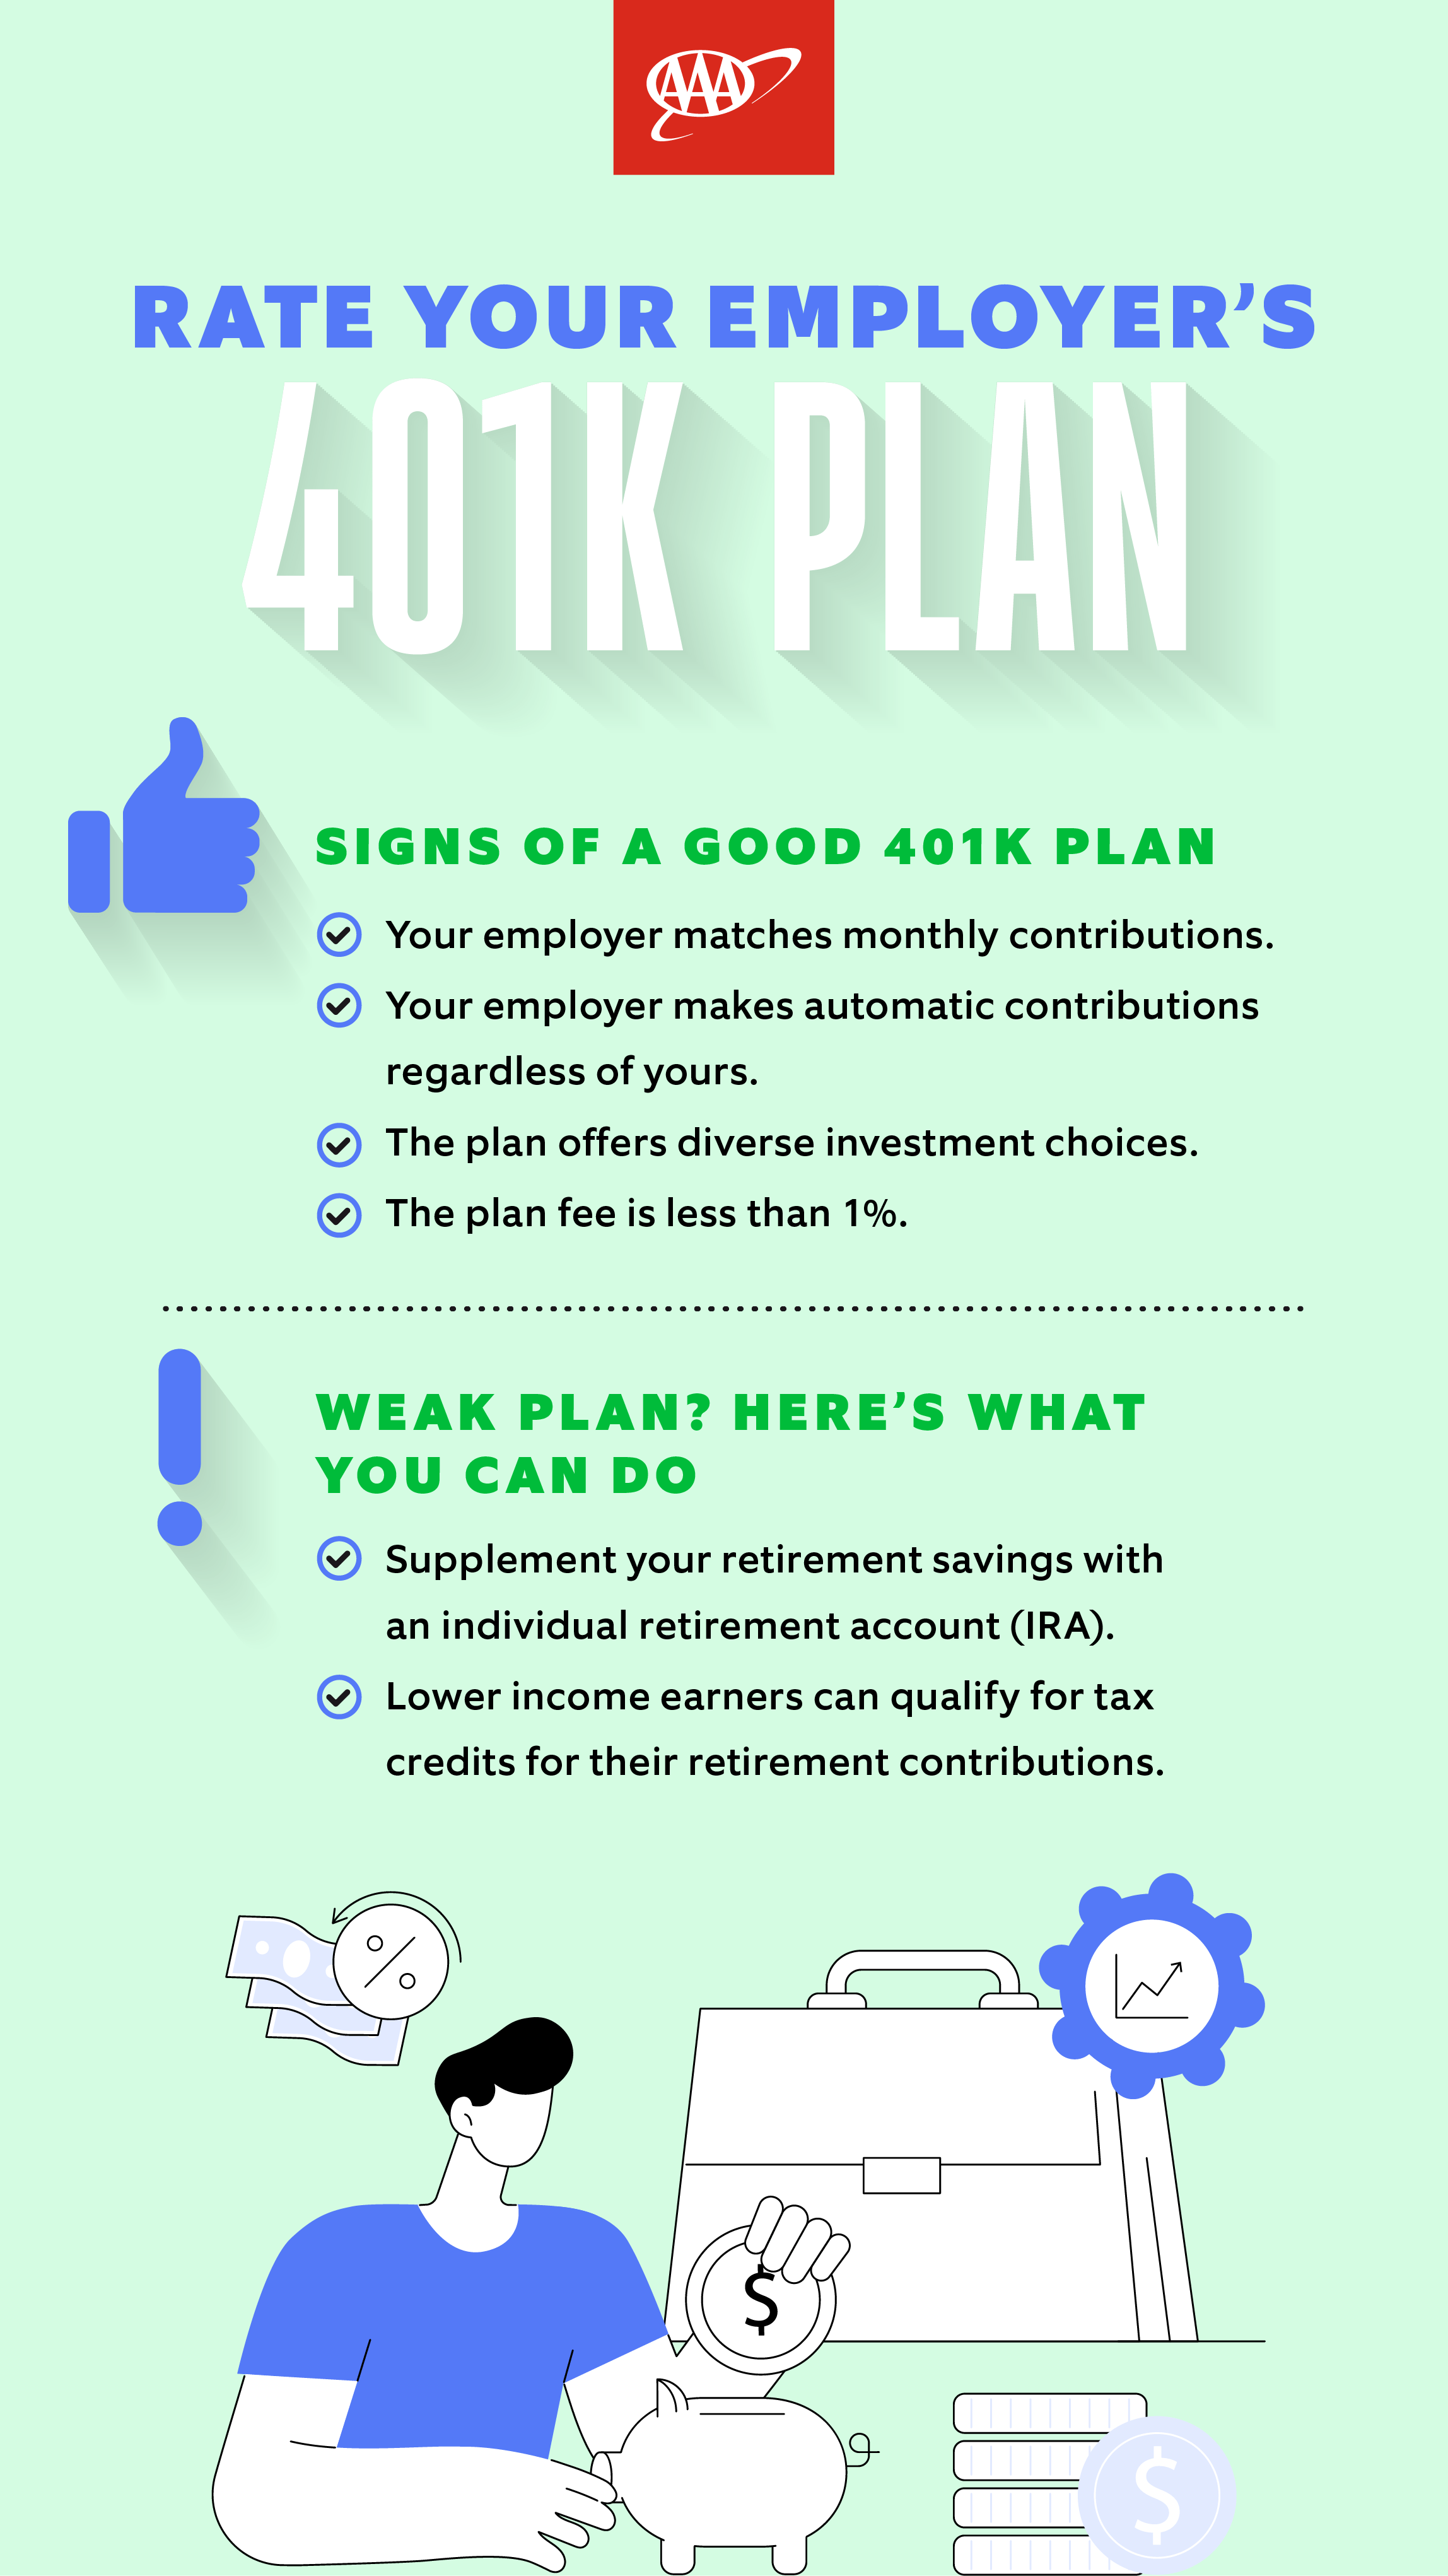 Infographic on how to rate an employer's 401k plan